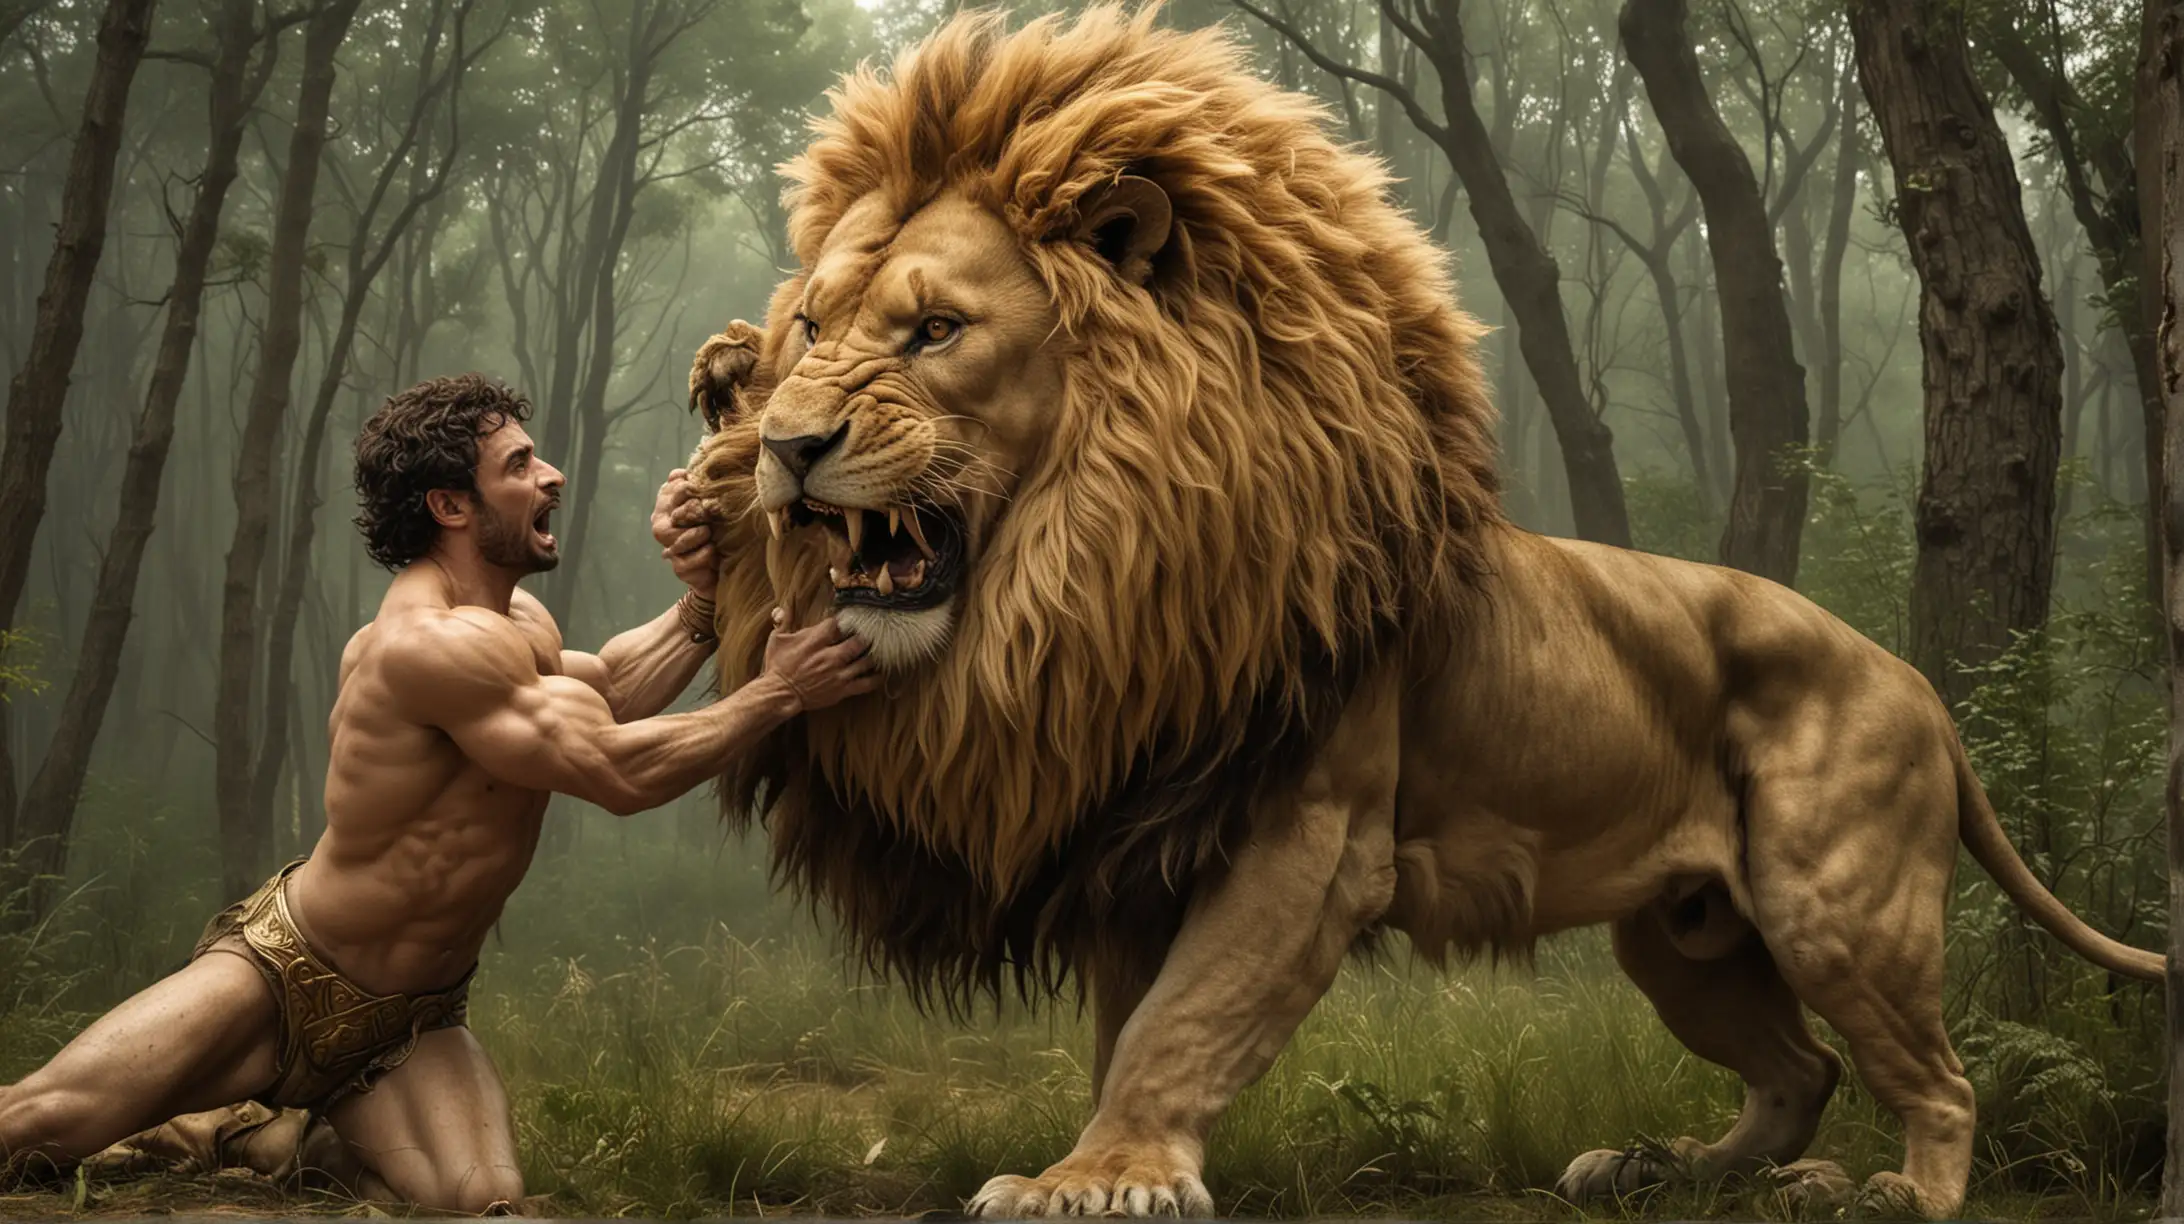 Gera Hero Strangling Lion: A muscular Greek hero, Gera, wrestles a gigantic lion with golden fur, his powerful hands gripping the lion’s neck in a forest clearing.